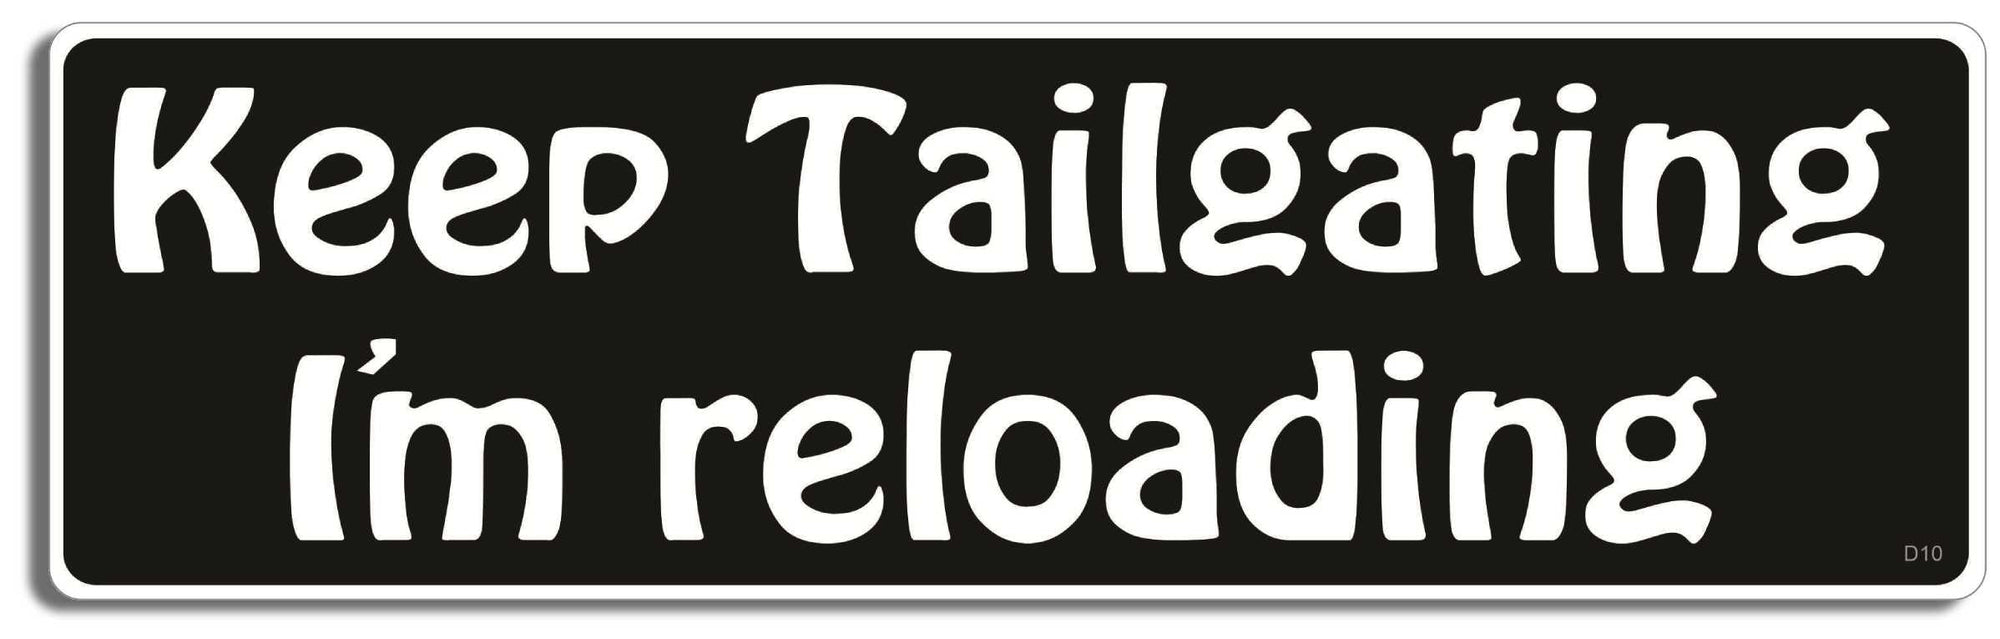 Keep tailgating, I'm reloading - 3" x 10" Bumper Sticker--Car Magnet- -  Decal Bumper Sticker-funny Bumper Sticker Car Magnet Keep tailgating, I'm reloading-  Decal for carsdrive safely, Driving, Funny, safe driving, tailgaters, tailgating